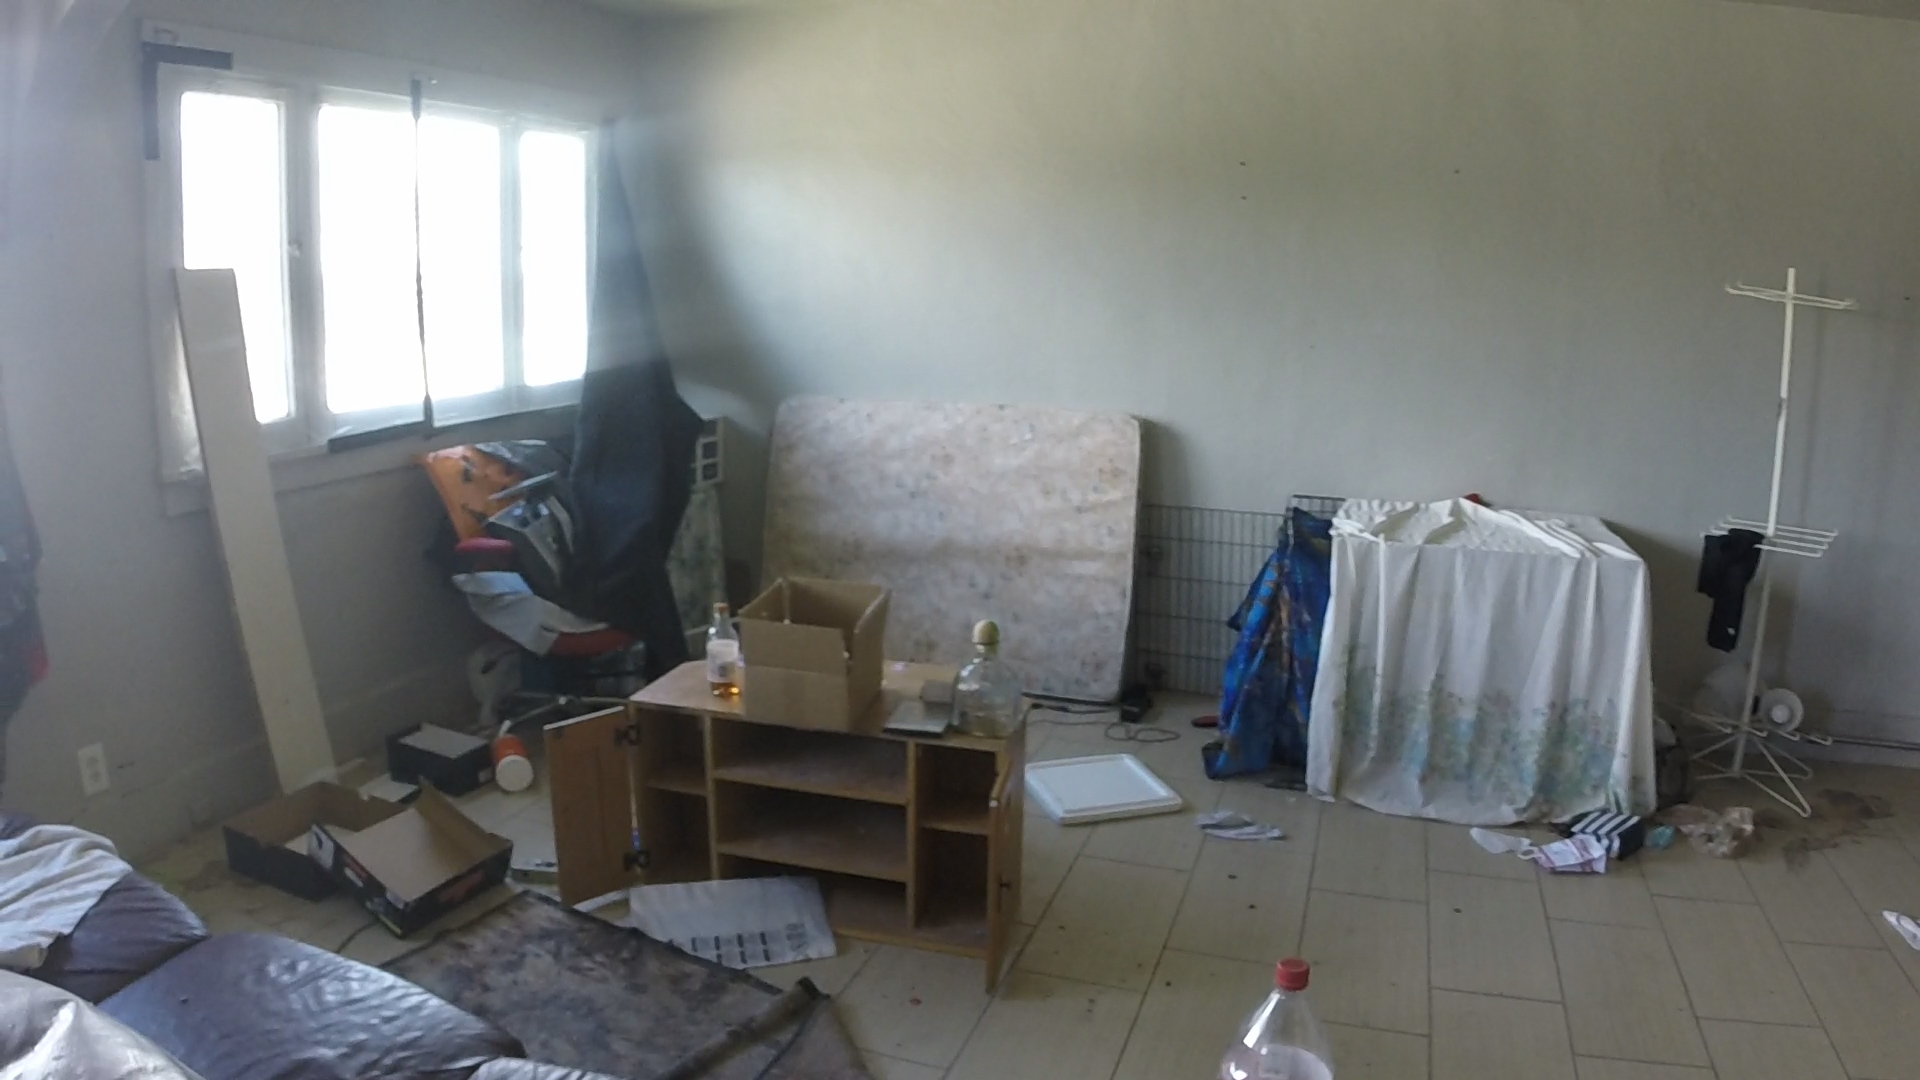 VIDEO: Eviction Aftermath – A Post COVID 19 Moratorium Eviction Story